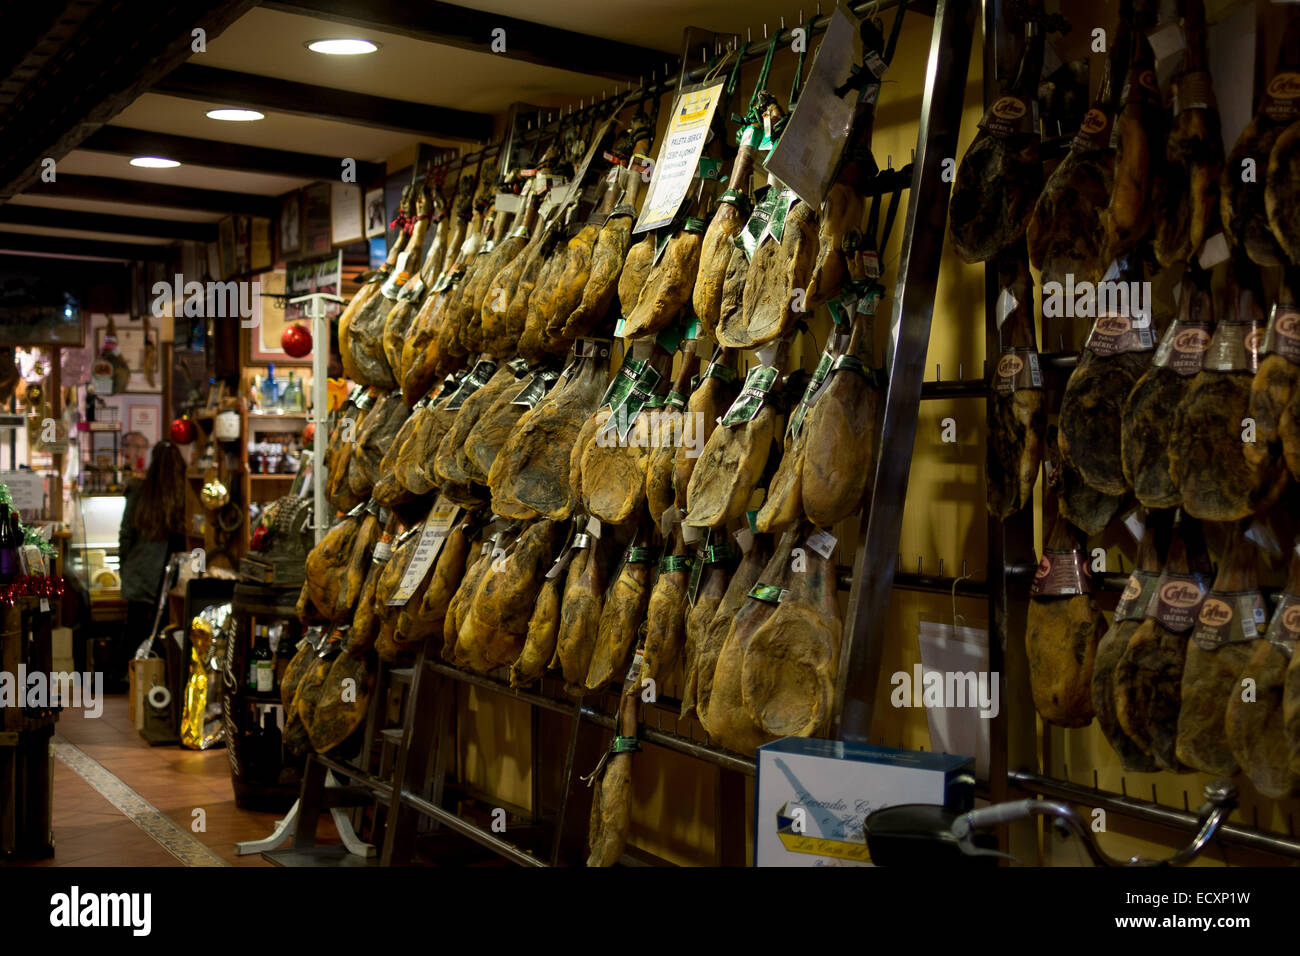 A shop in Ronda, Spain selling dry cured ham Stock Photo